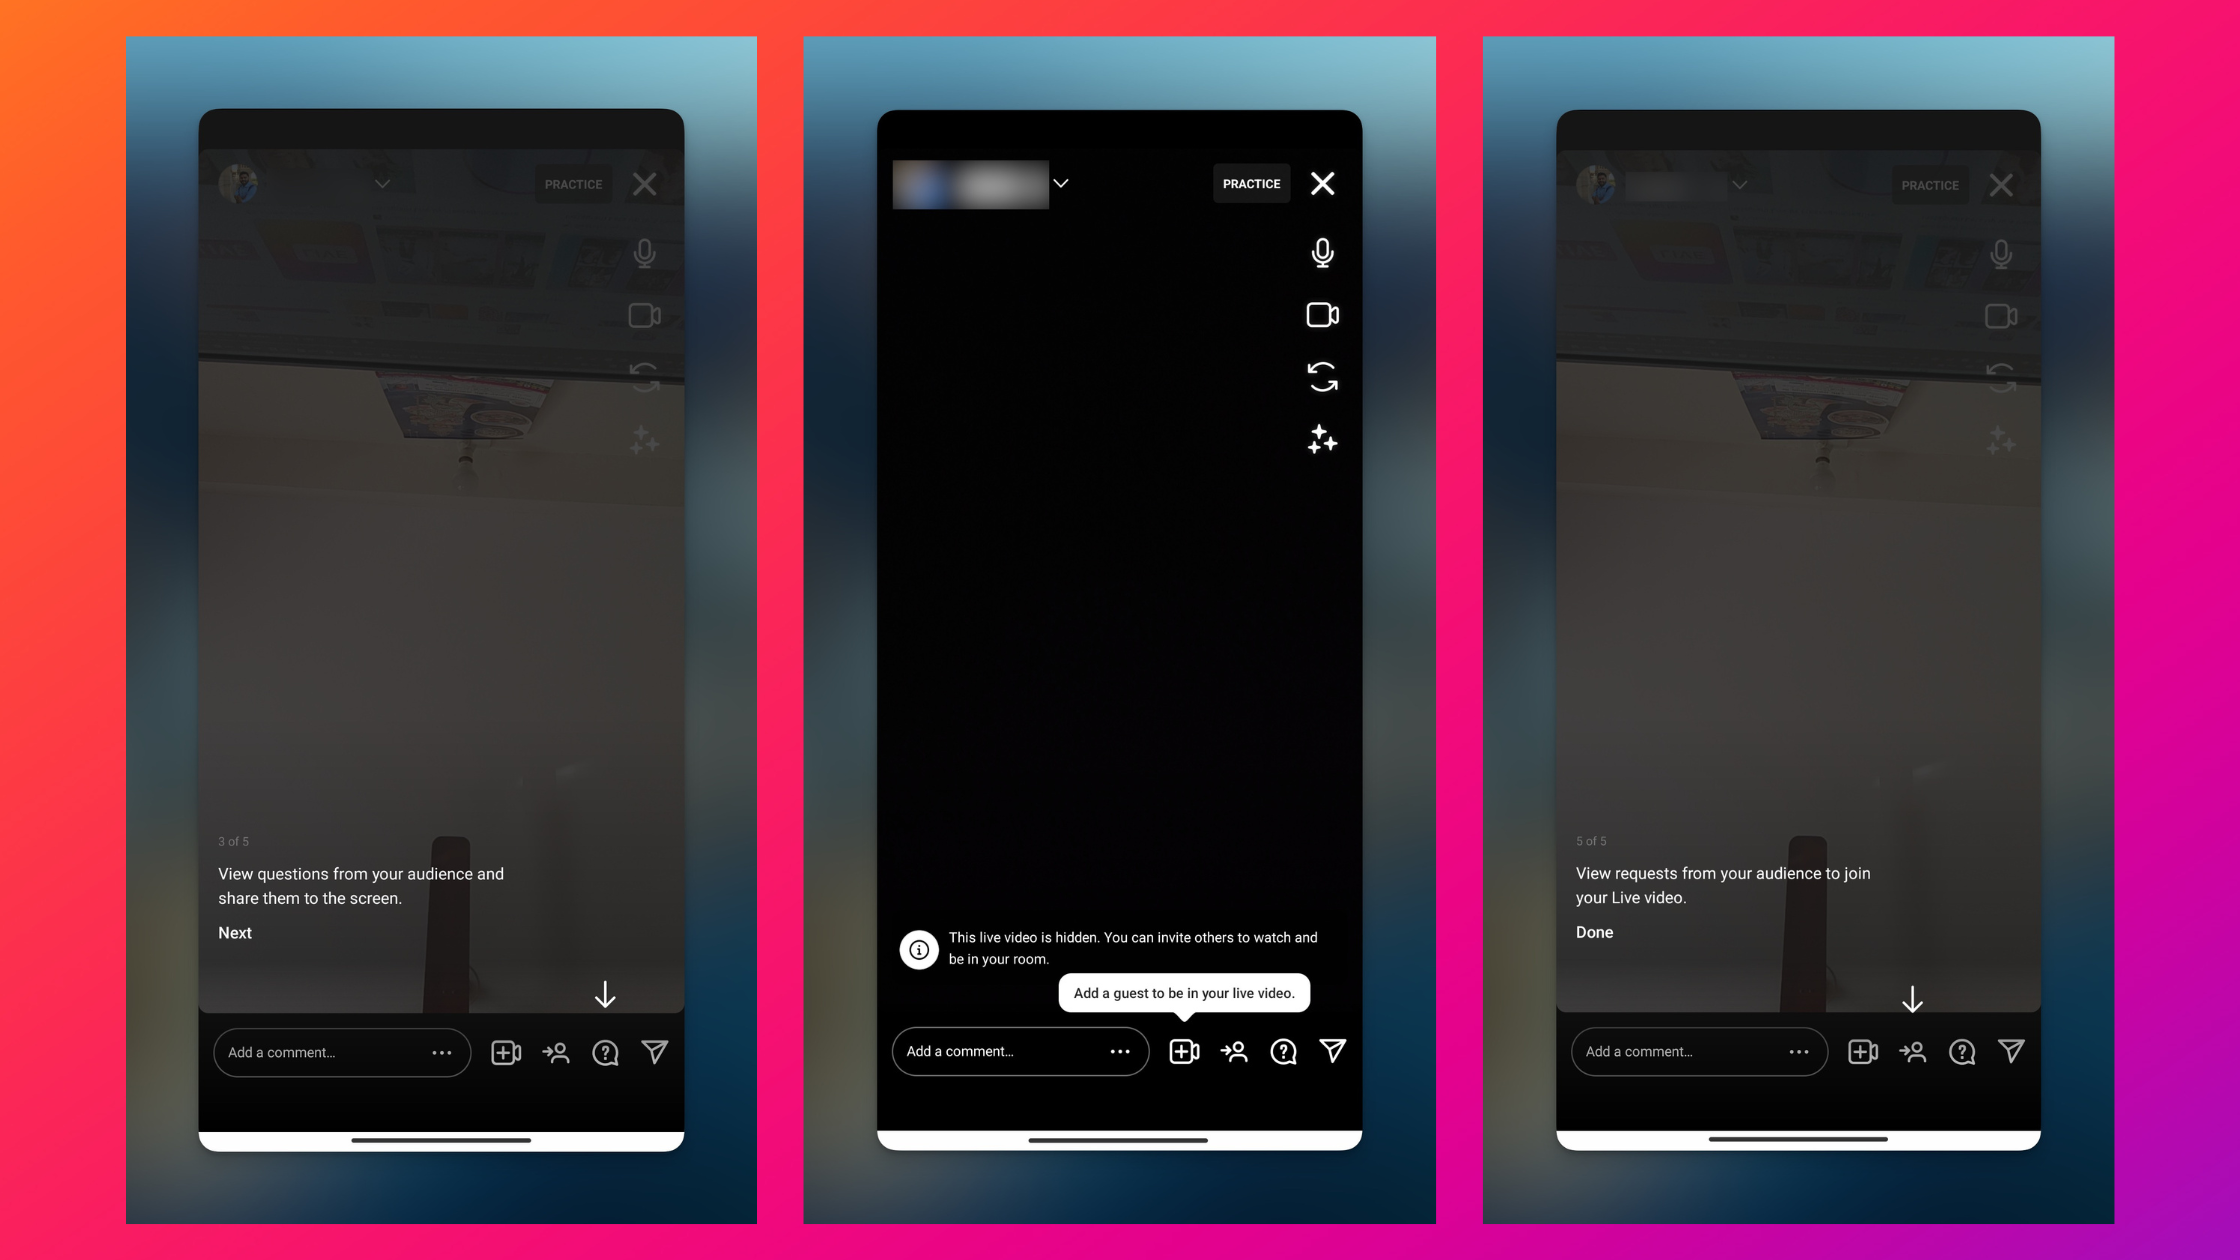 Remote.tools shows various settings you can customize your Instagram live stream